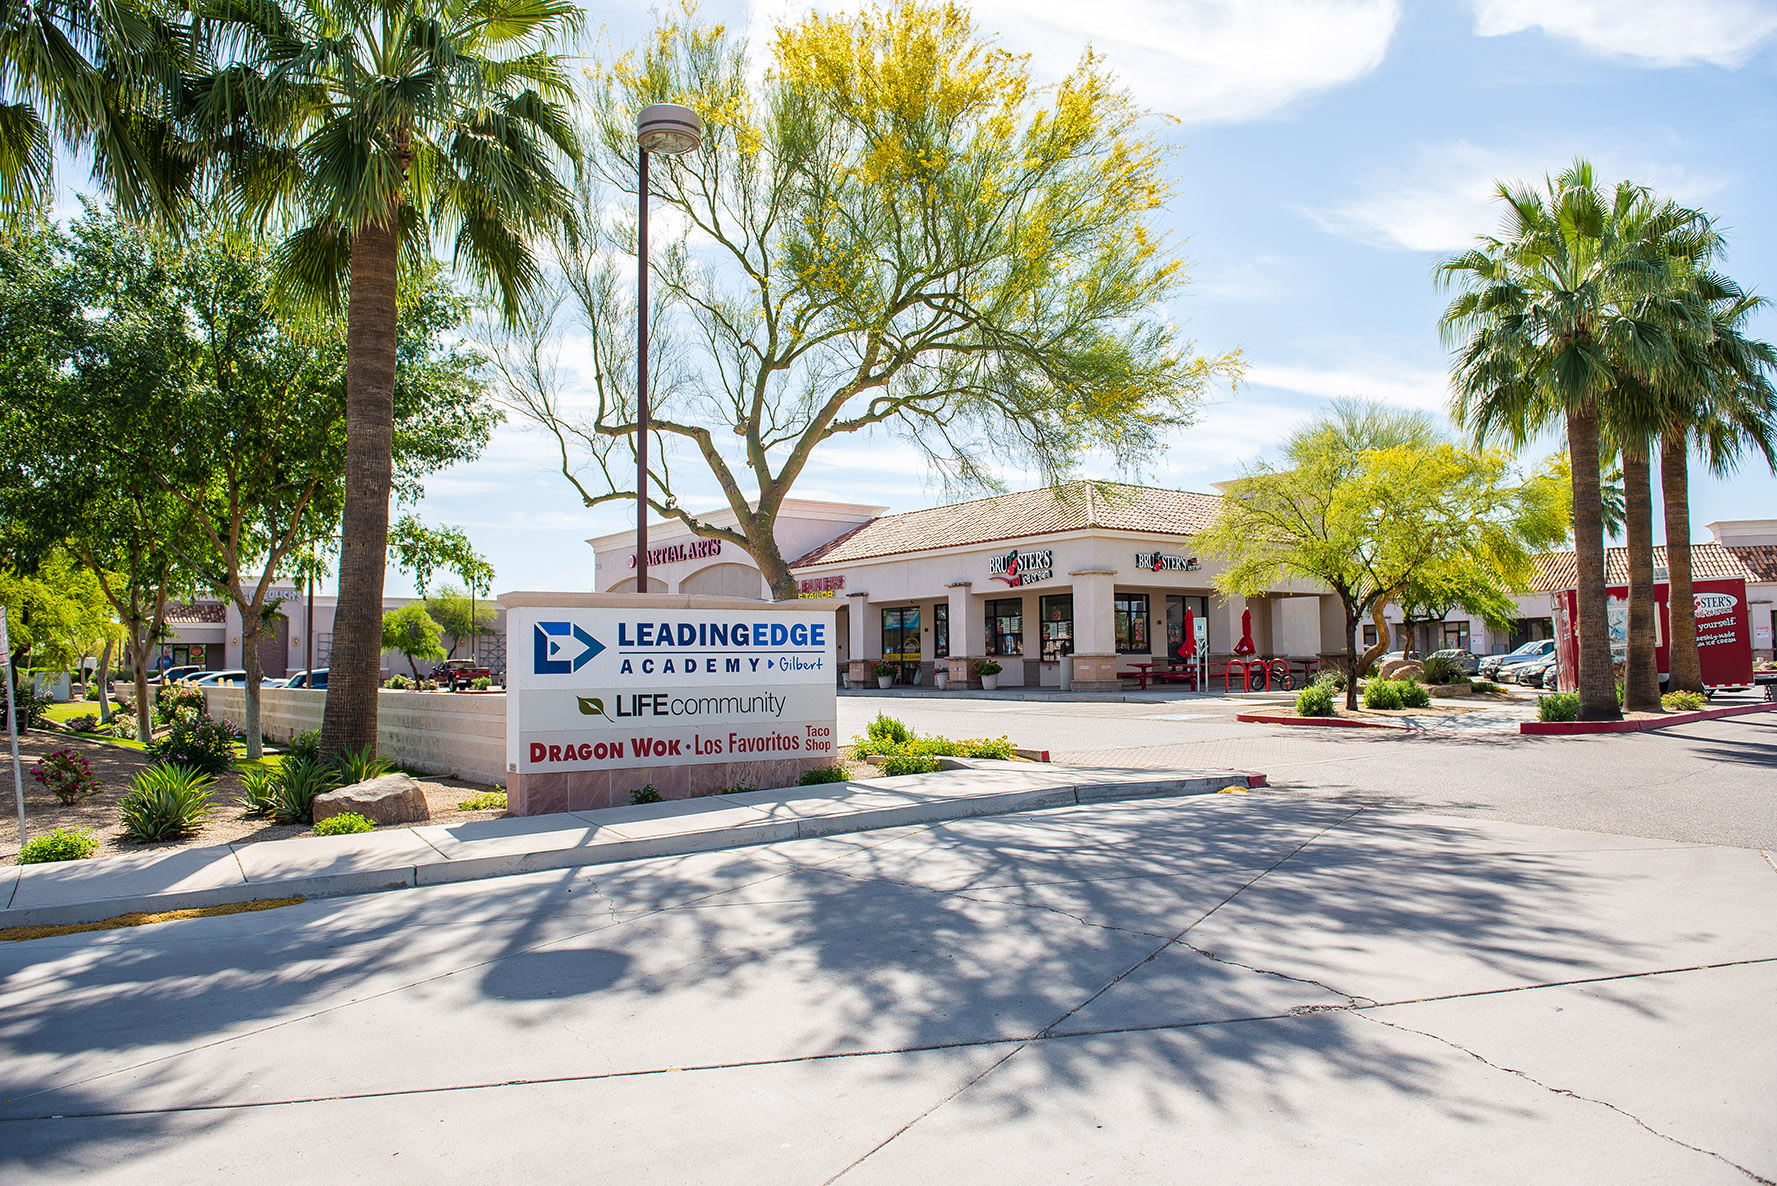 Velocity Retail Group’s Investment Division Completes Multi-Million Dollar Investment Sale of Cooper Square in Gilbert, Arizona 1